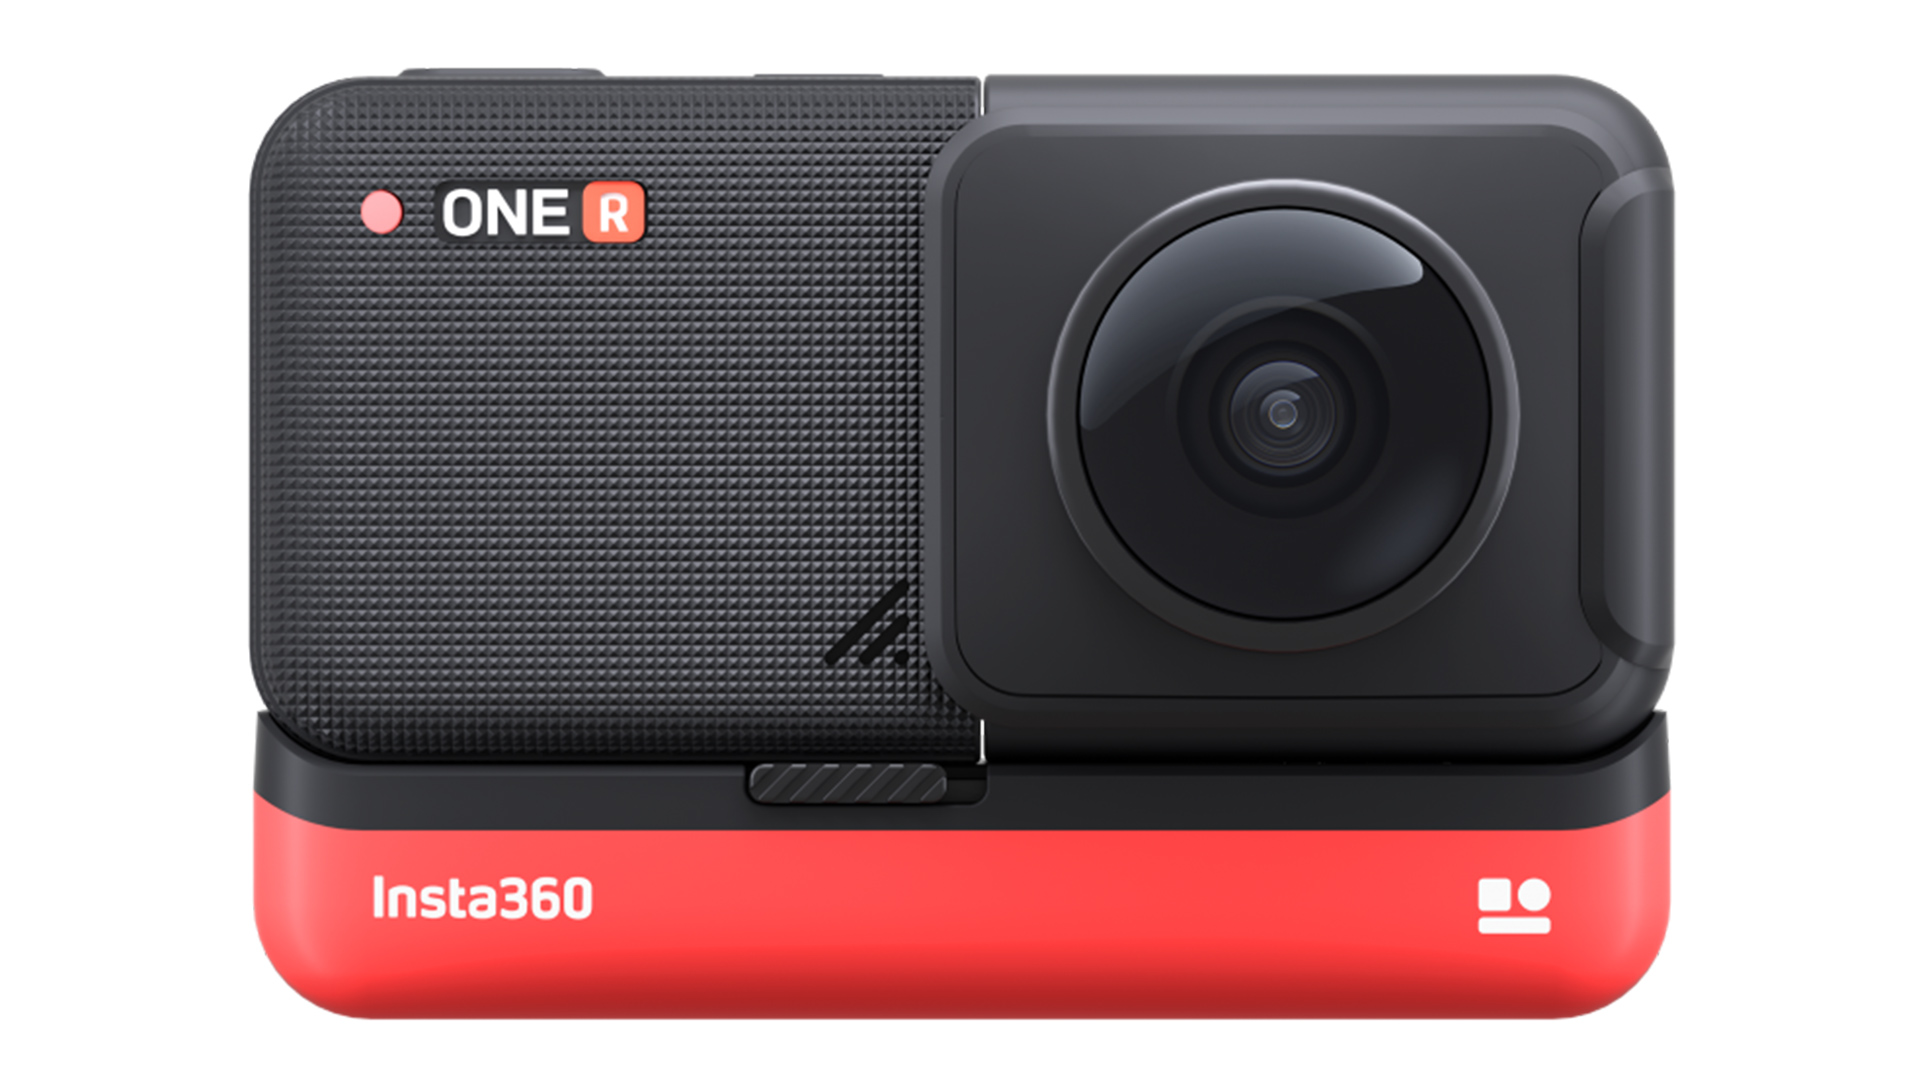 Insta360 ONE R: The world's first truly modular action camera has 